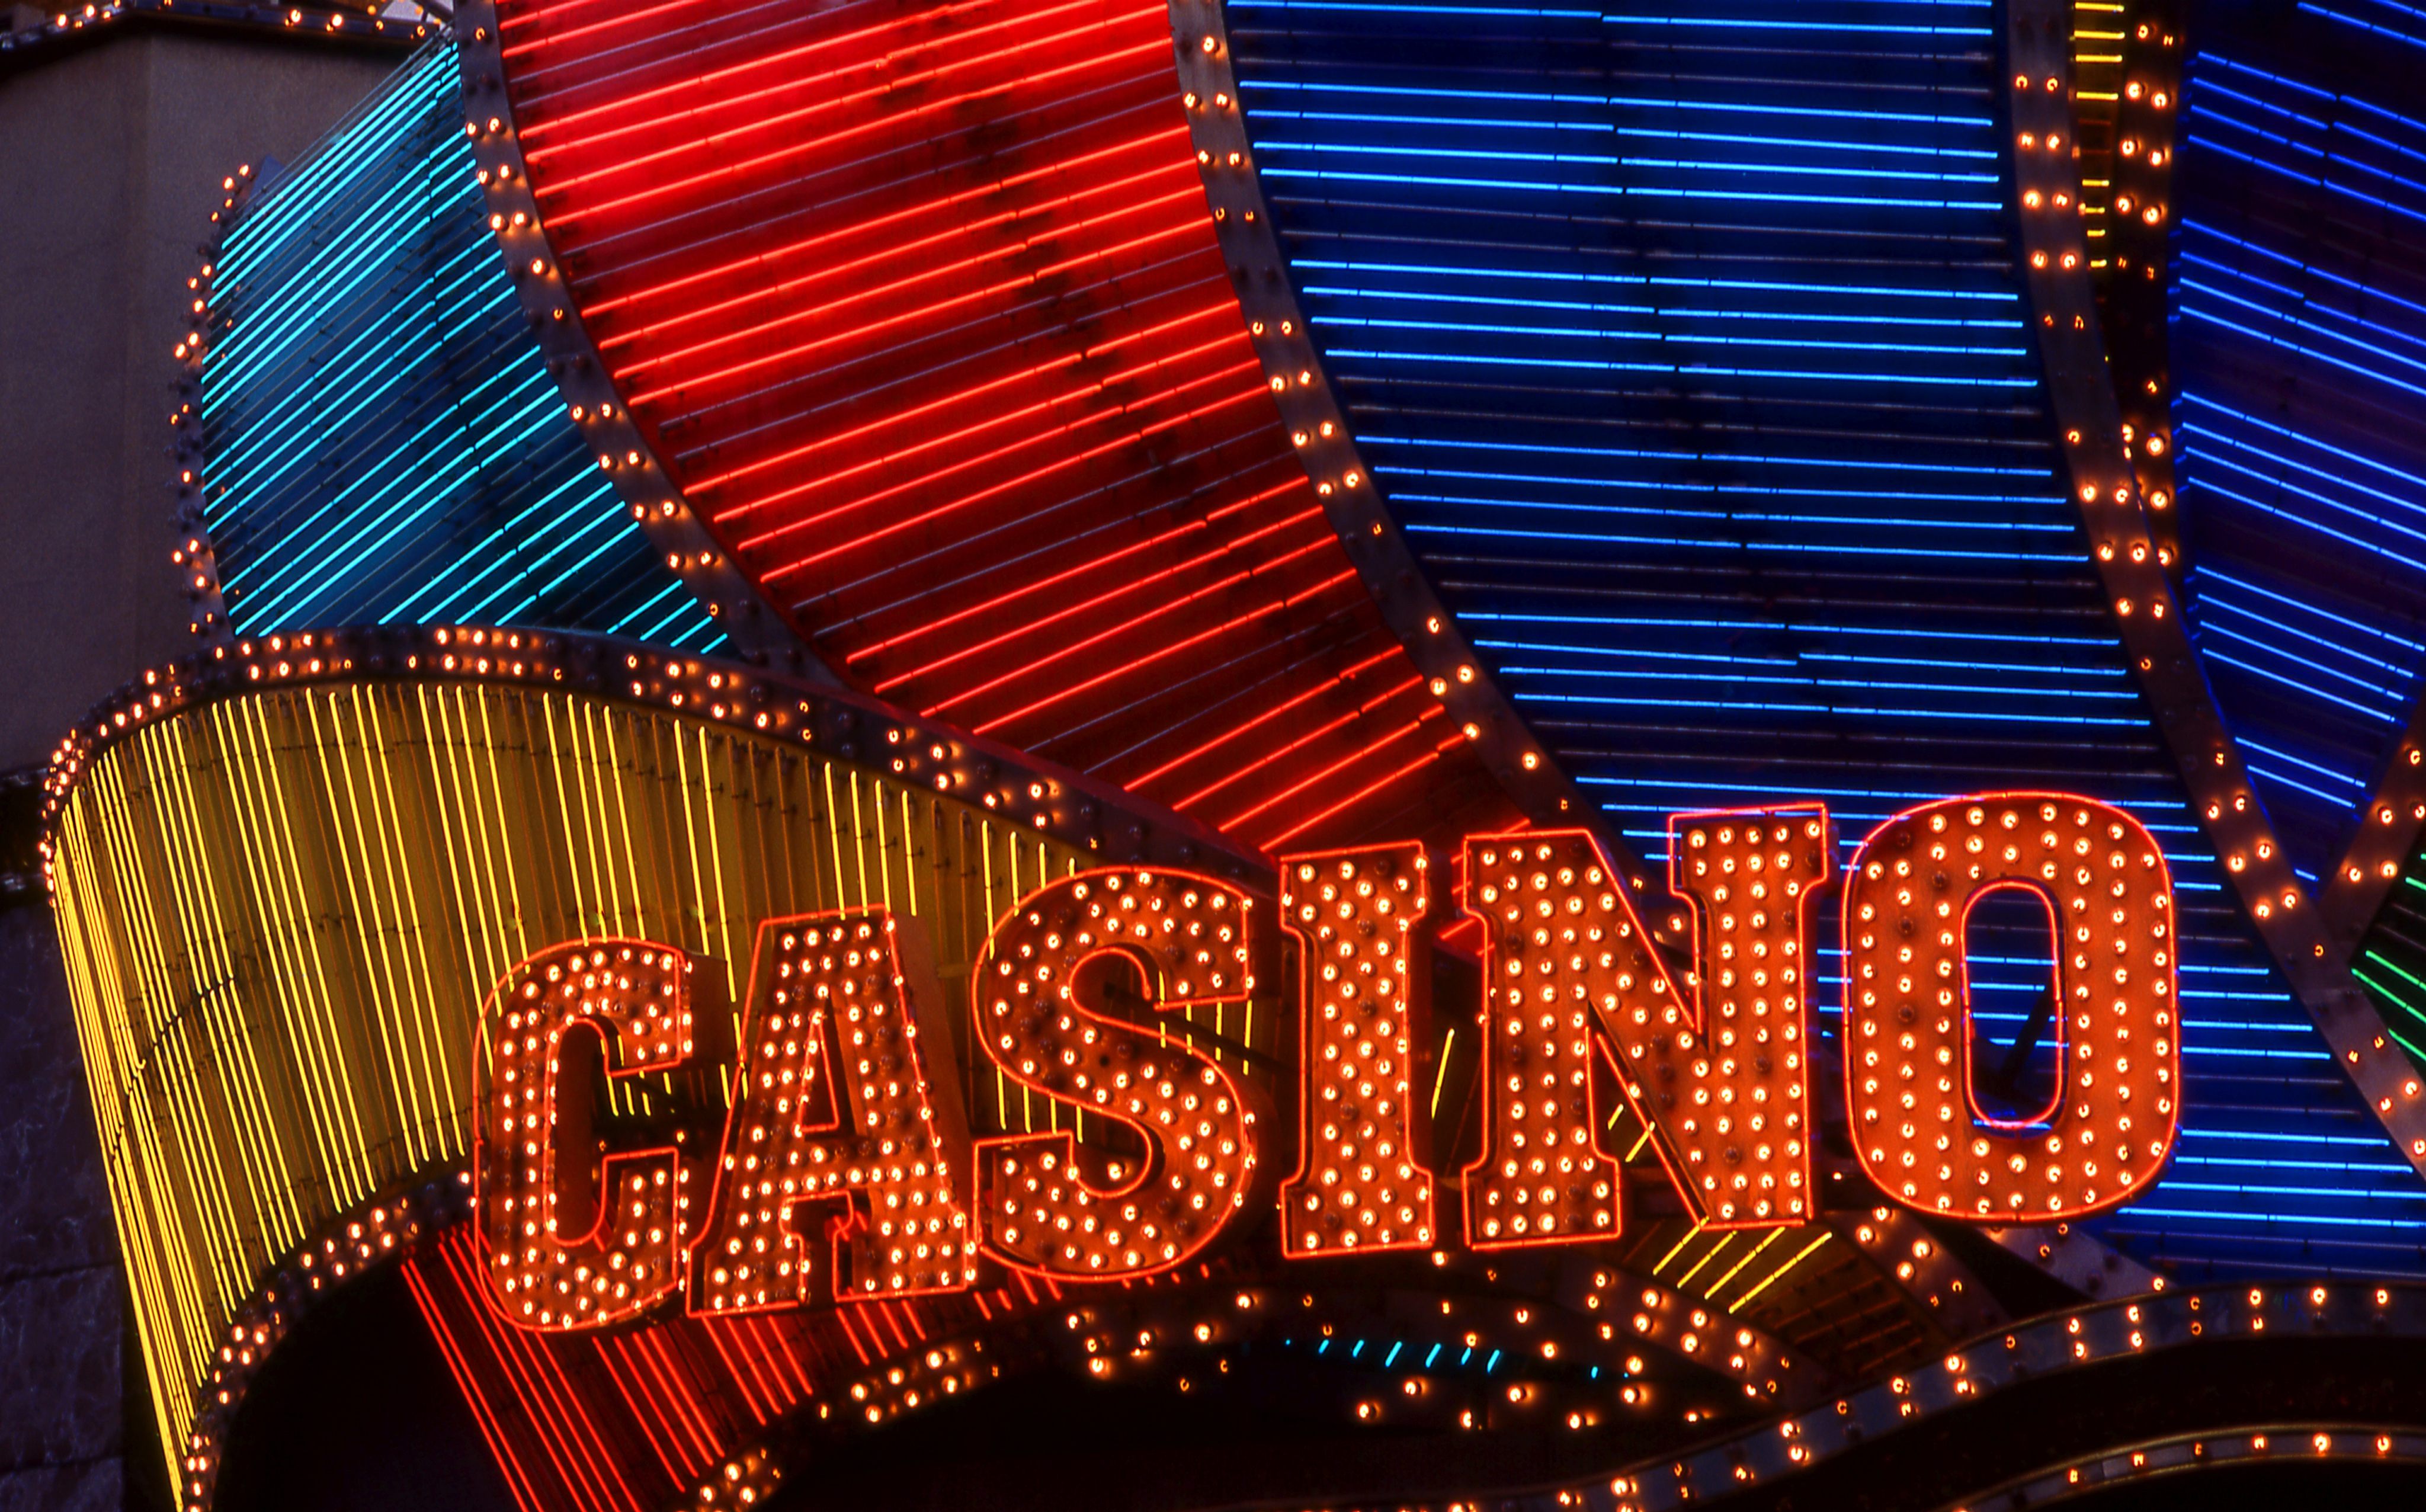 Macau’s casino operators are set to rake in the lowest revenue on record this year because of Covid-19 restrictions imposed by the city. Photo: Getty Images